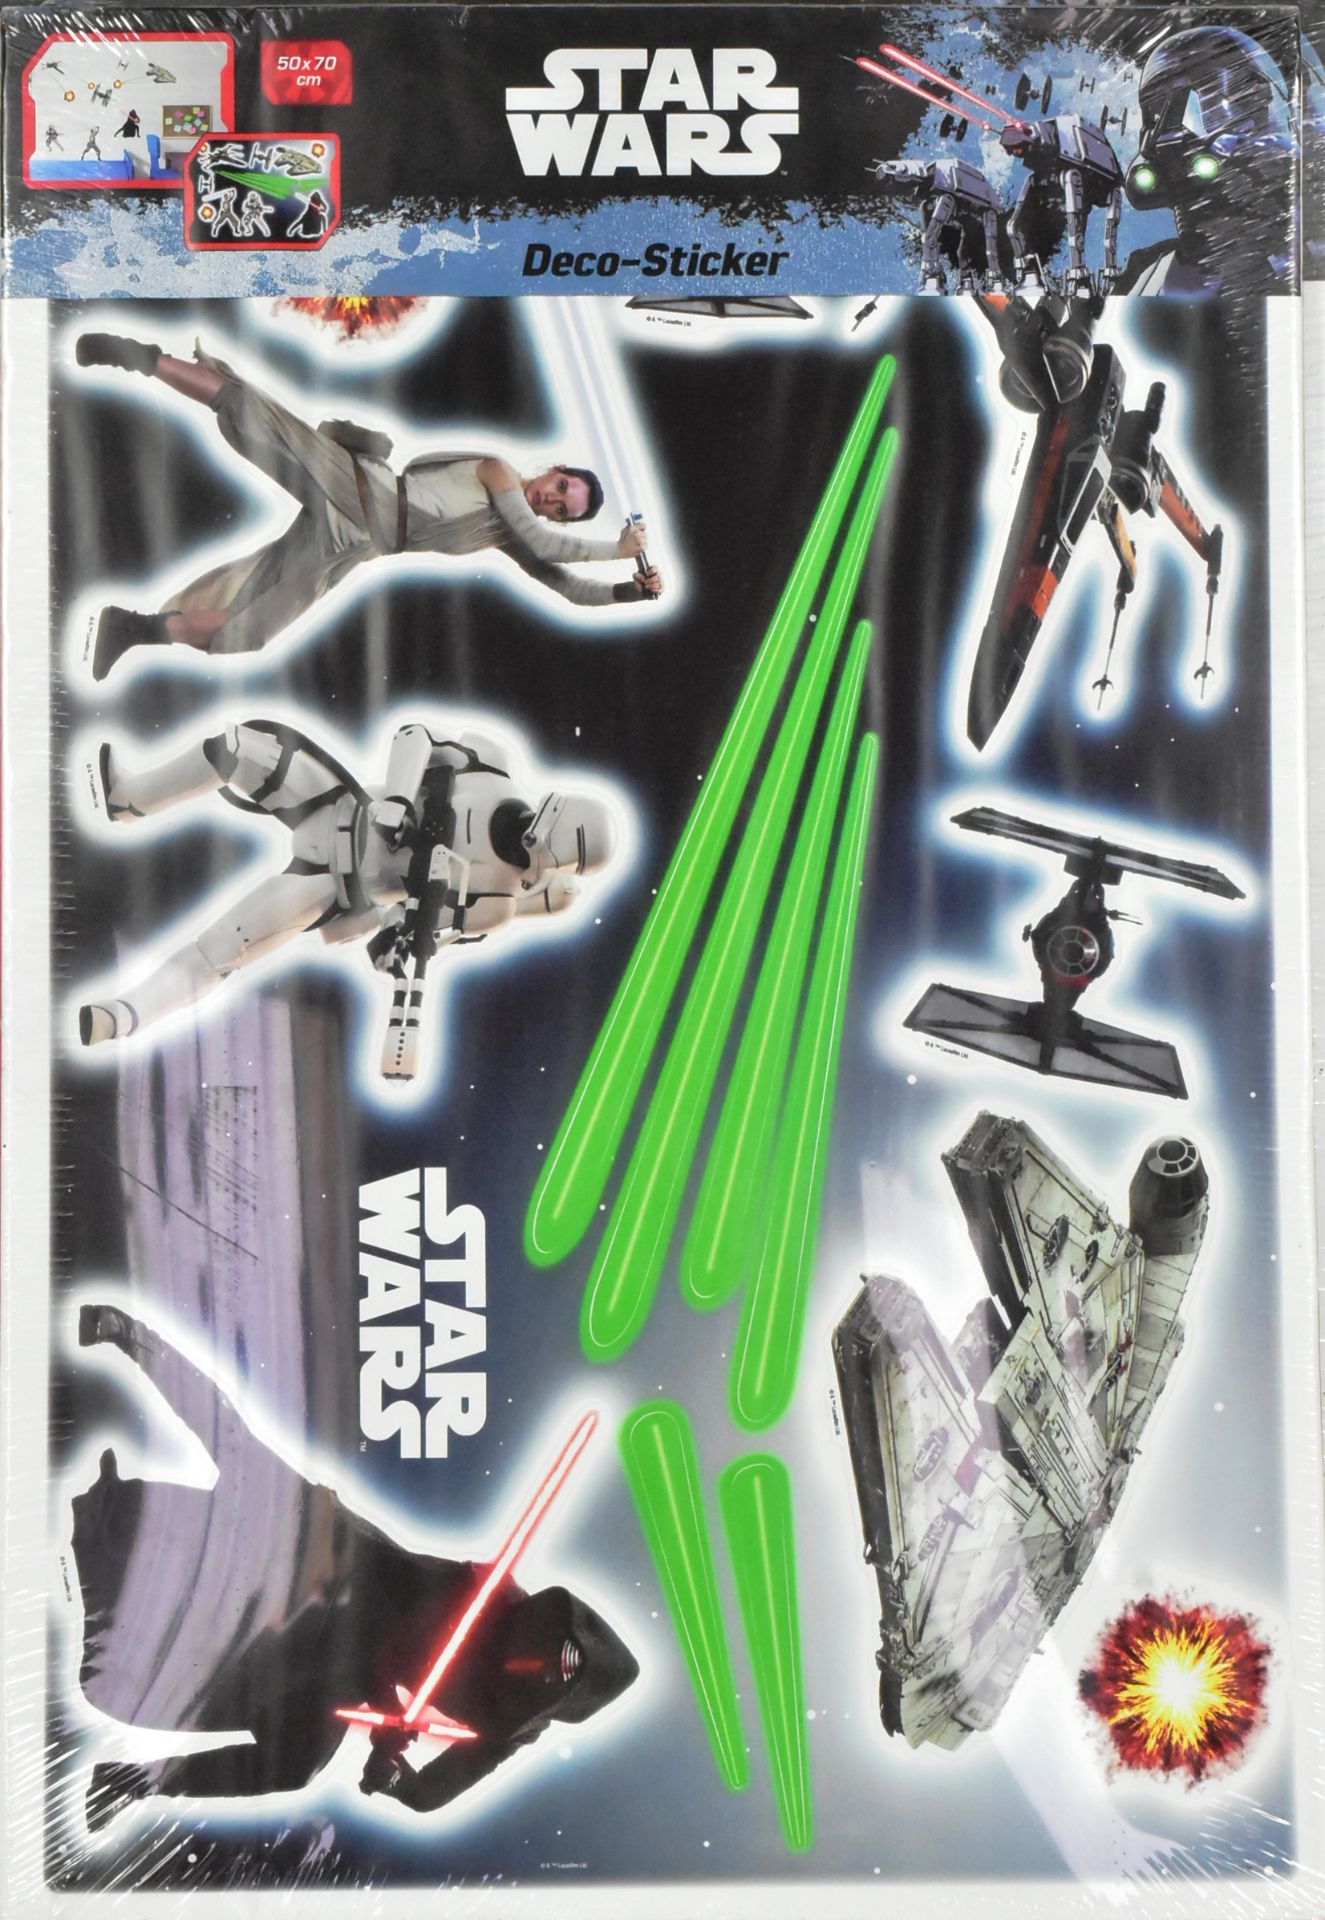 COLLECTION OF DISNEY STAR WARS DECO STICKERS - Image 3 of 3